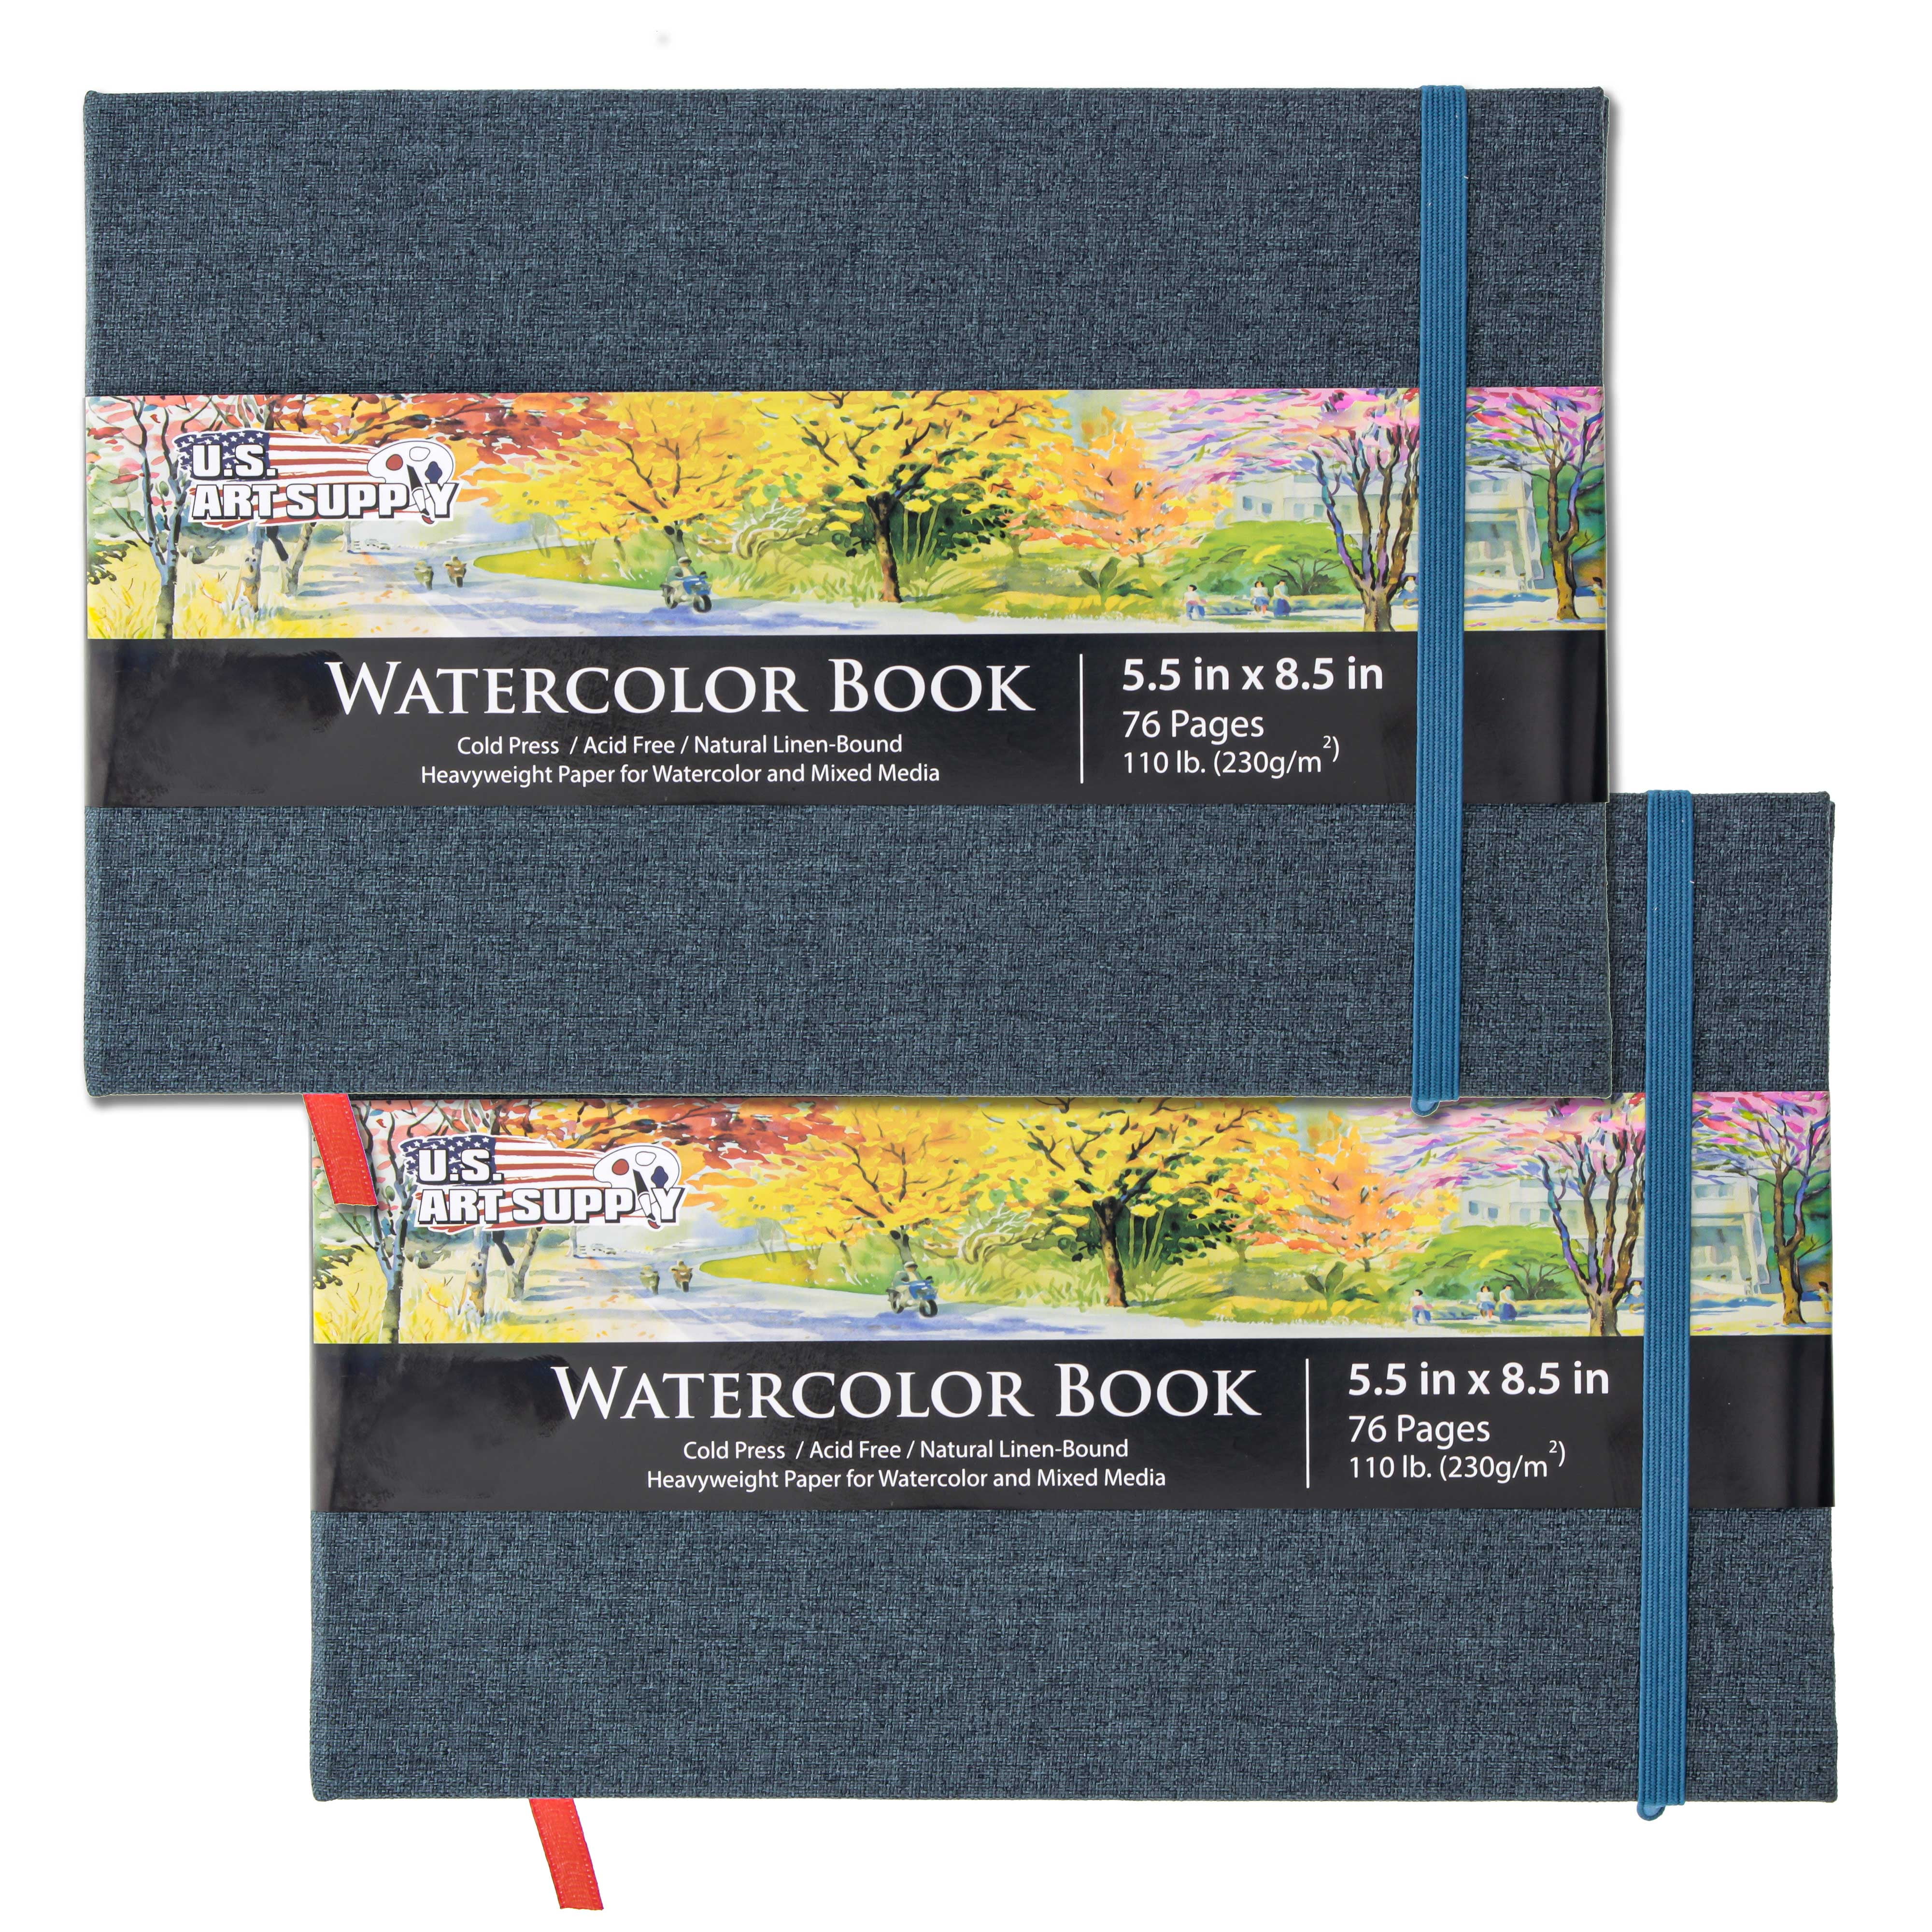 U.S. Art Supply 5.5 inch x 8.5 inch Watercolor Book, 2 Pack, 76 Sheets, 110 lb (230 Gsm) - Linen-Bound Hardcover Artists Paper Pads - Acid-free, Cold